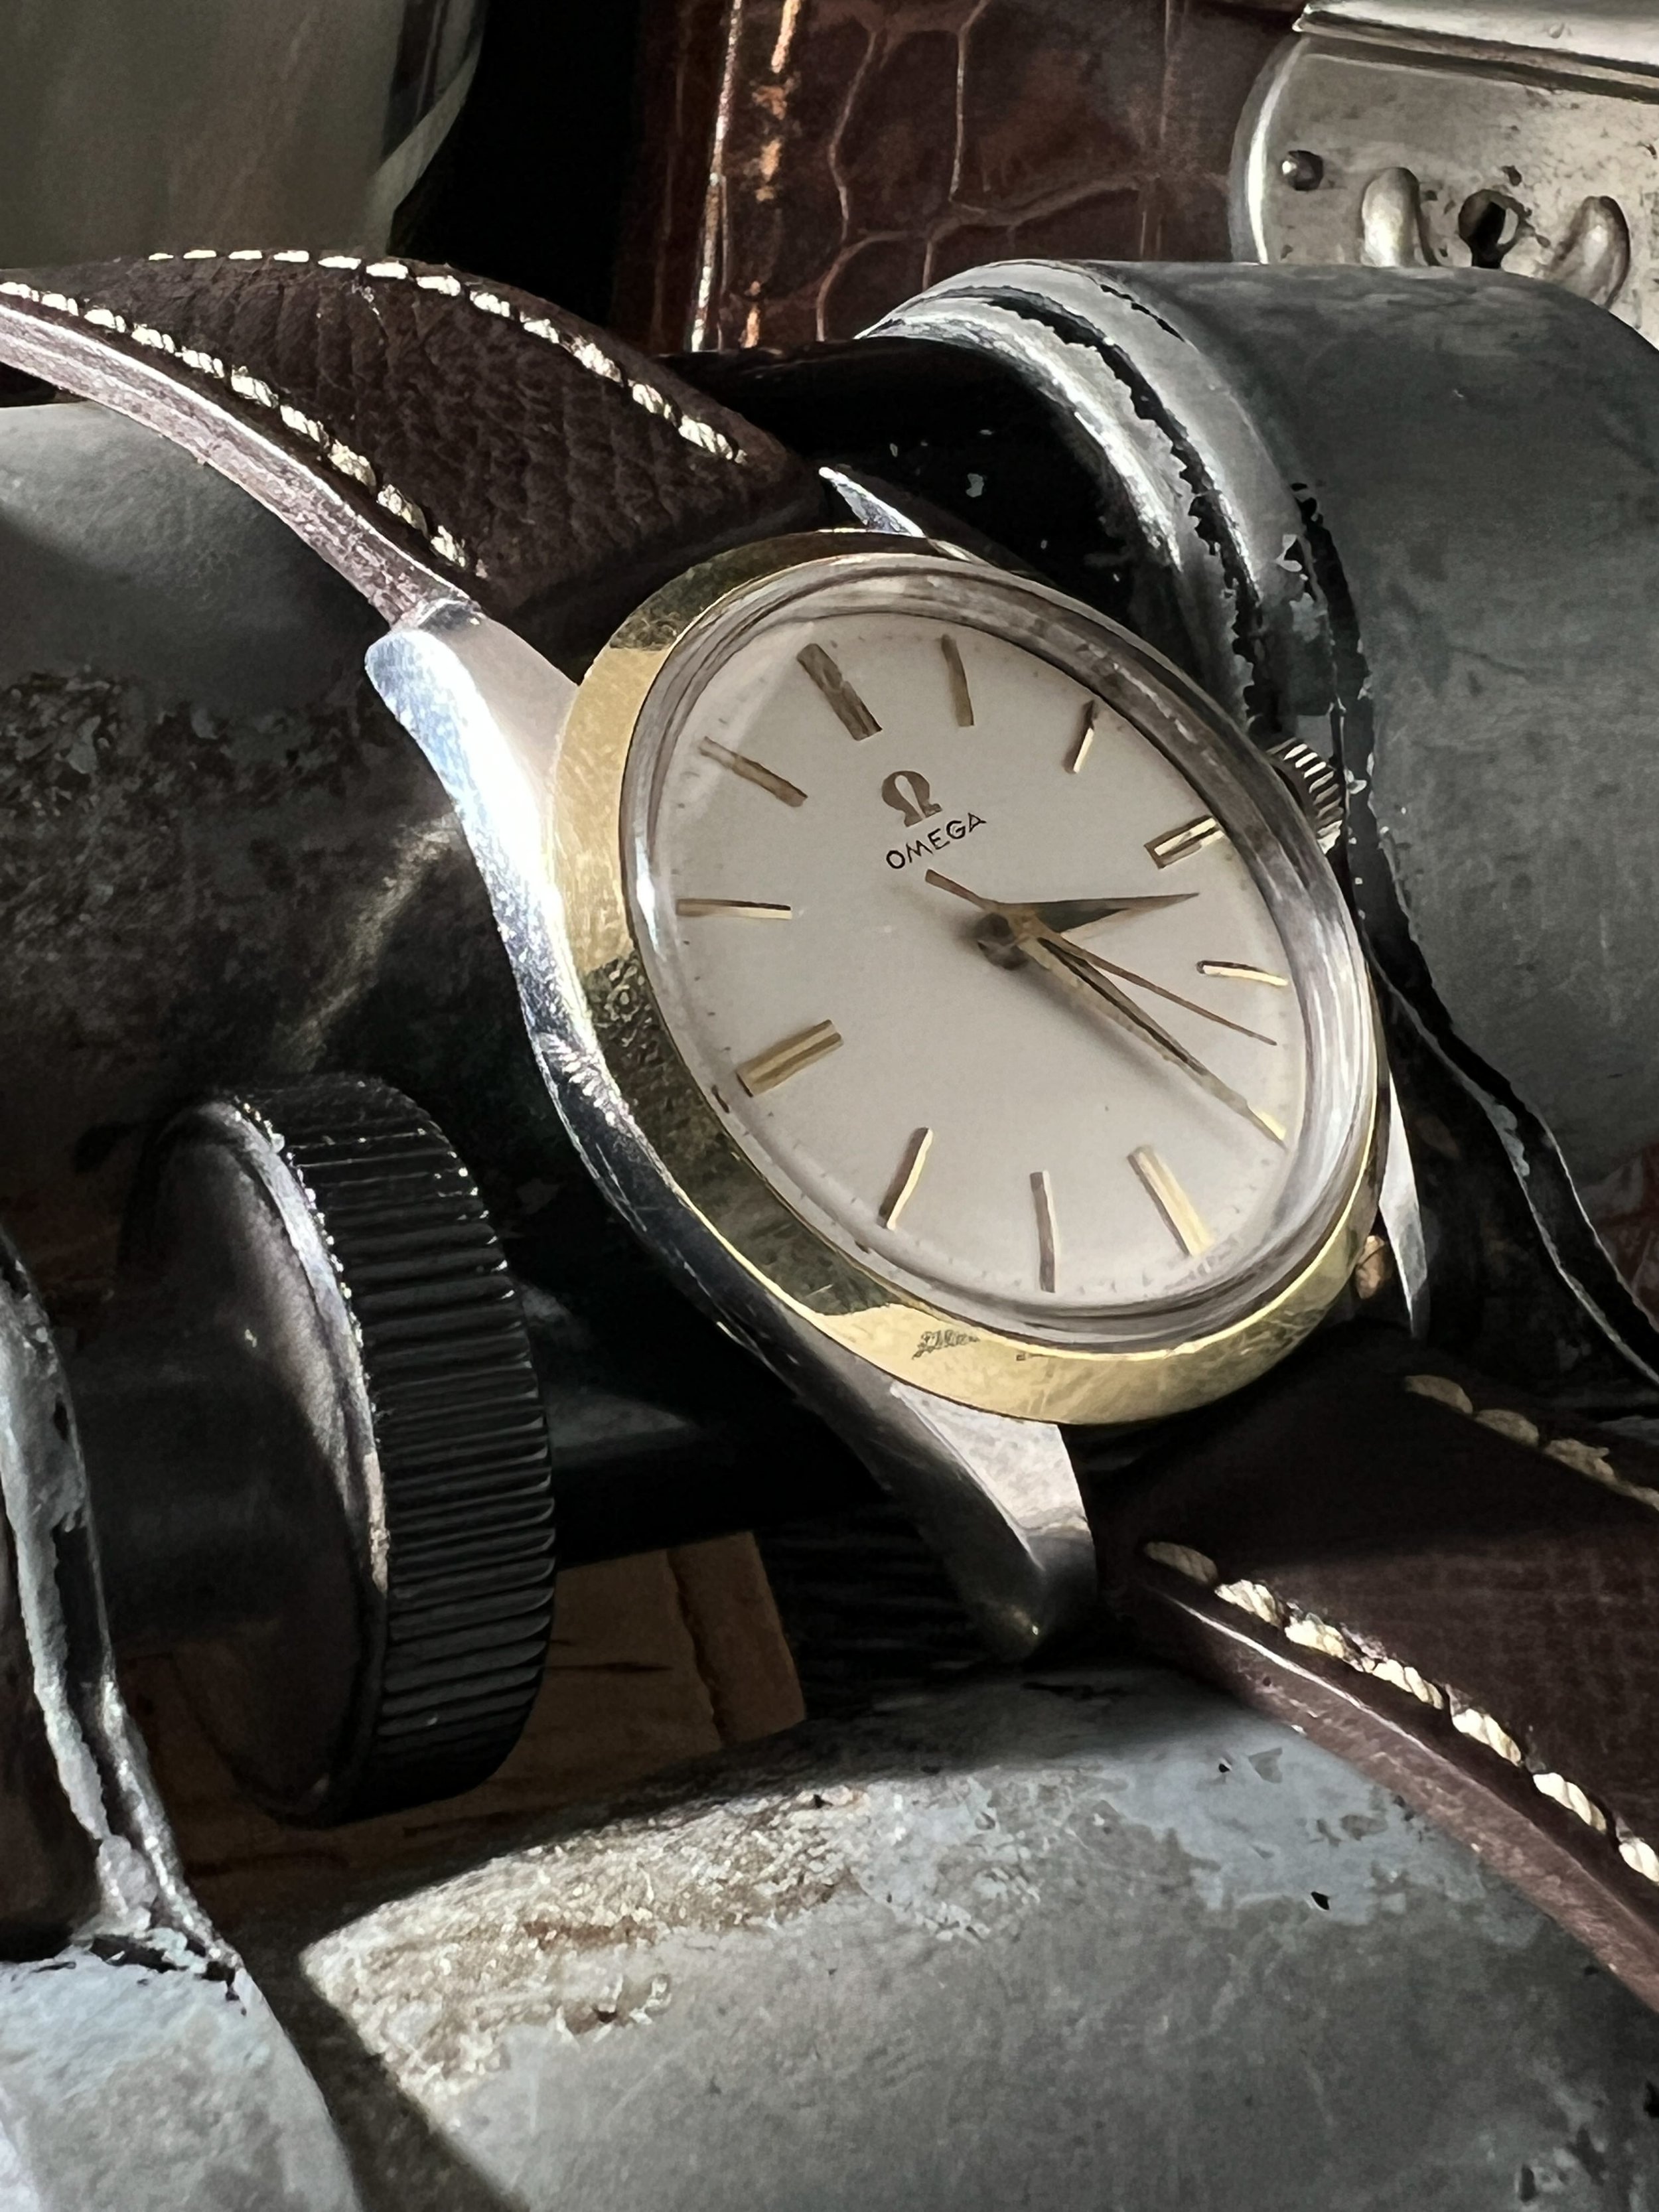 1958 Omega Seamaster — Cool Vintage Watches